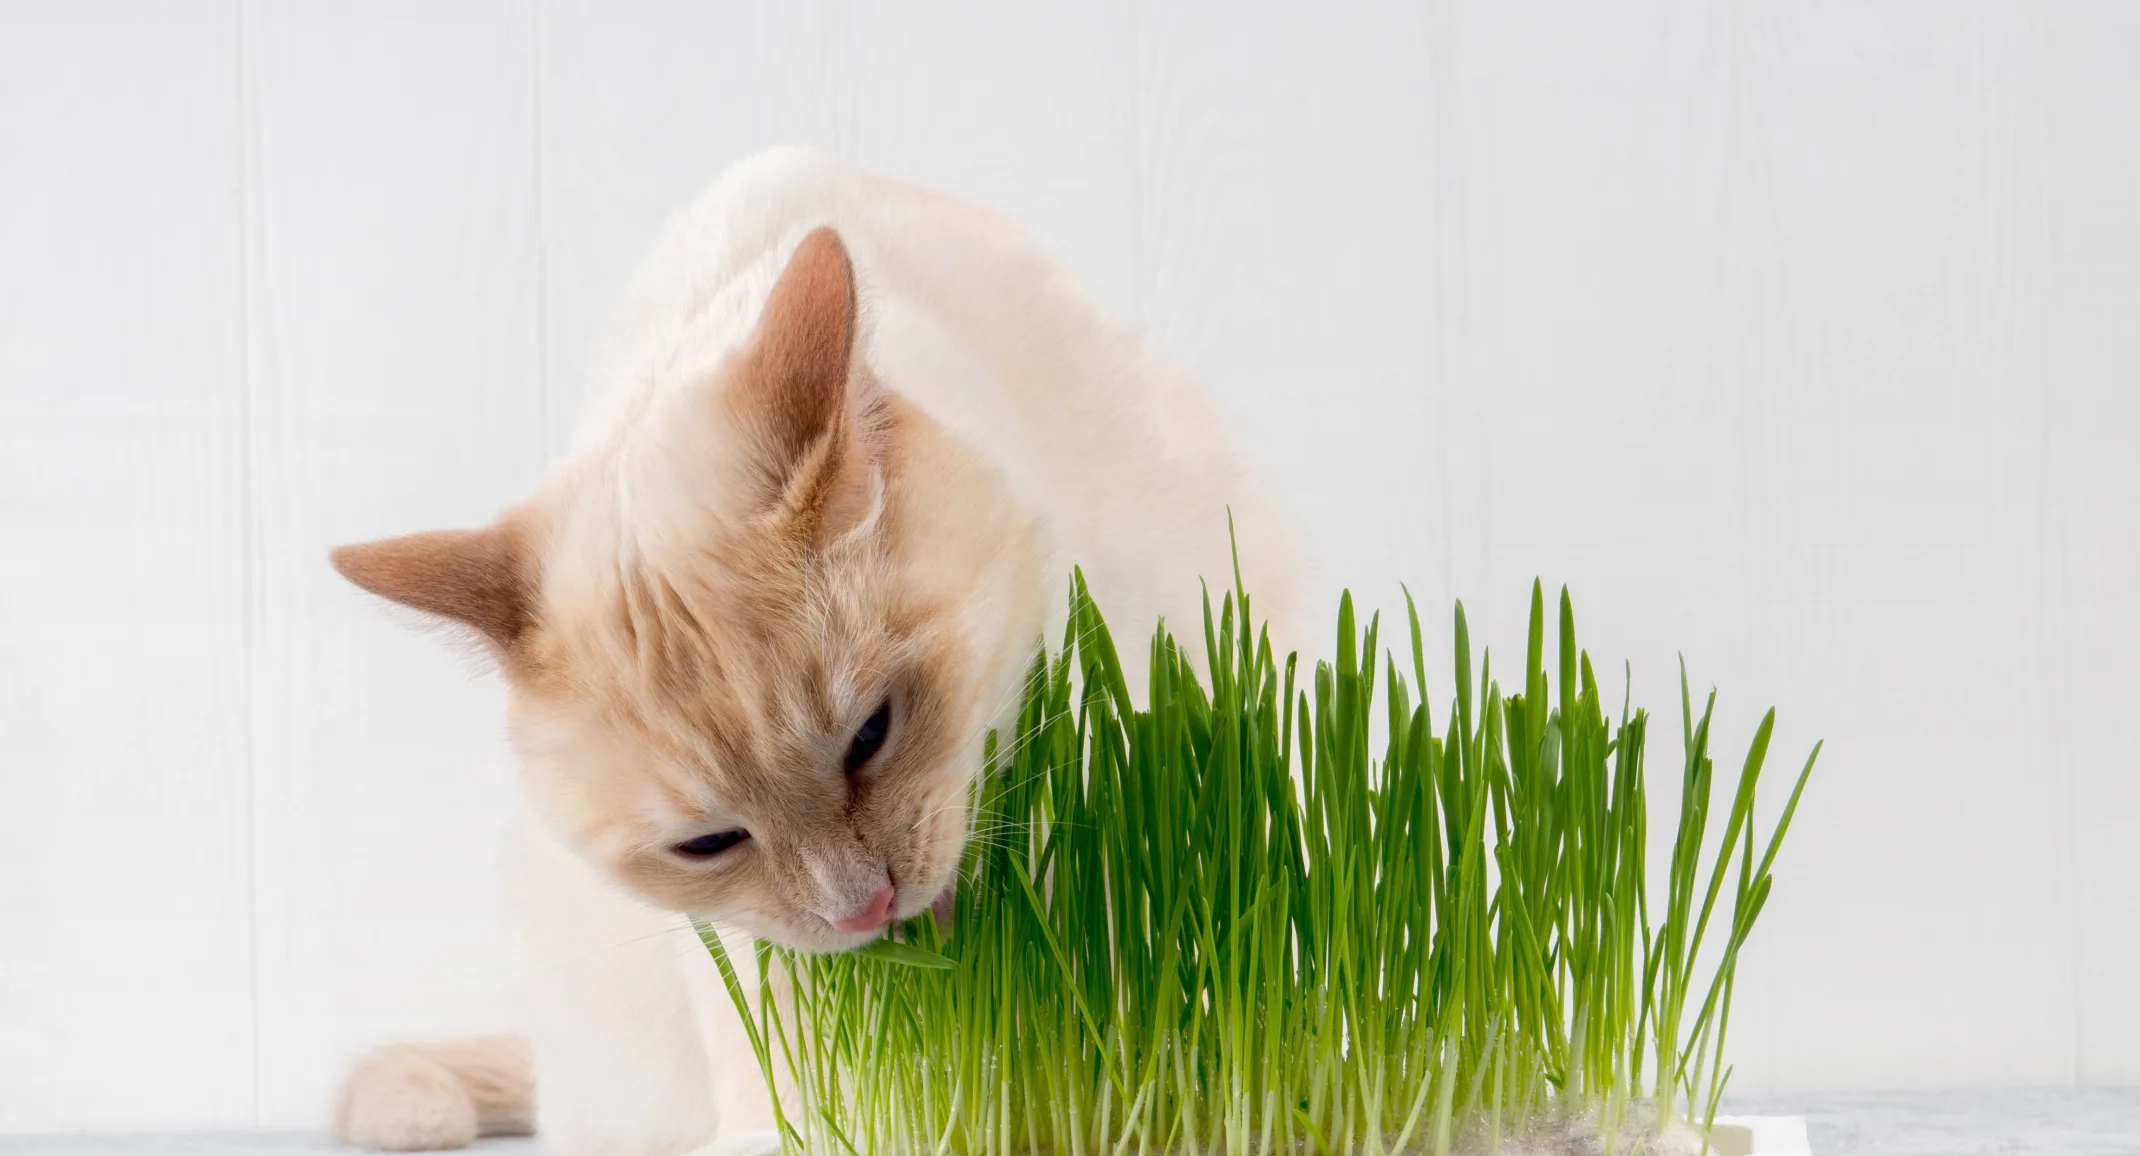 A small tan cat indoors sitting on a table eating grass from a potted plant 